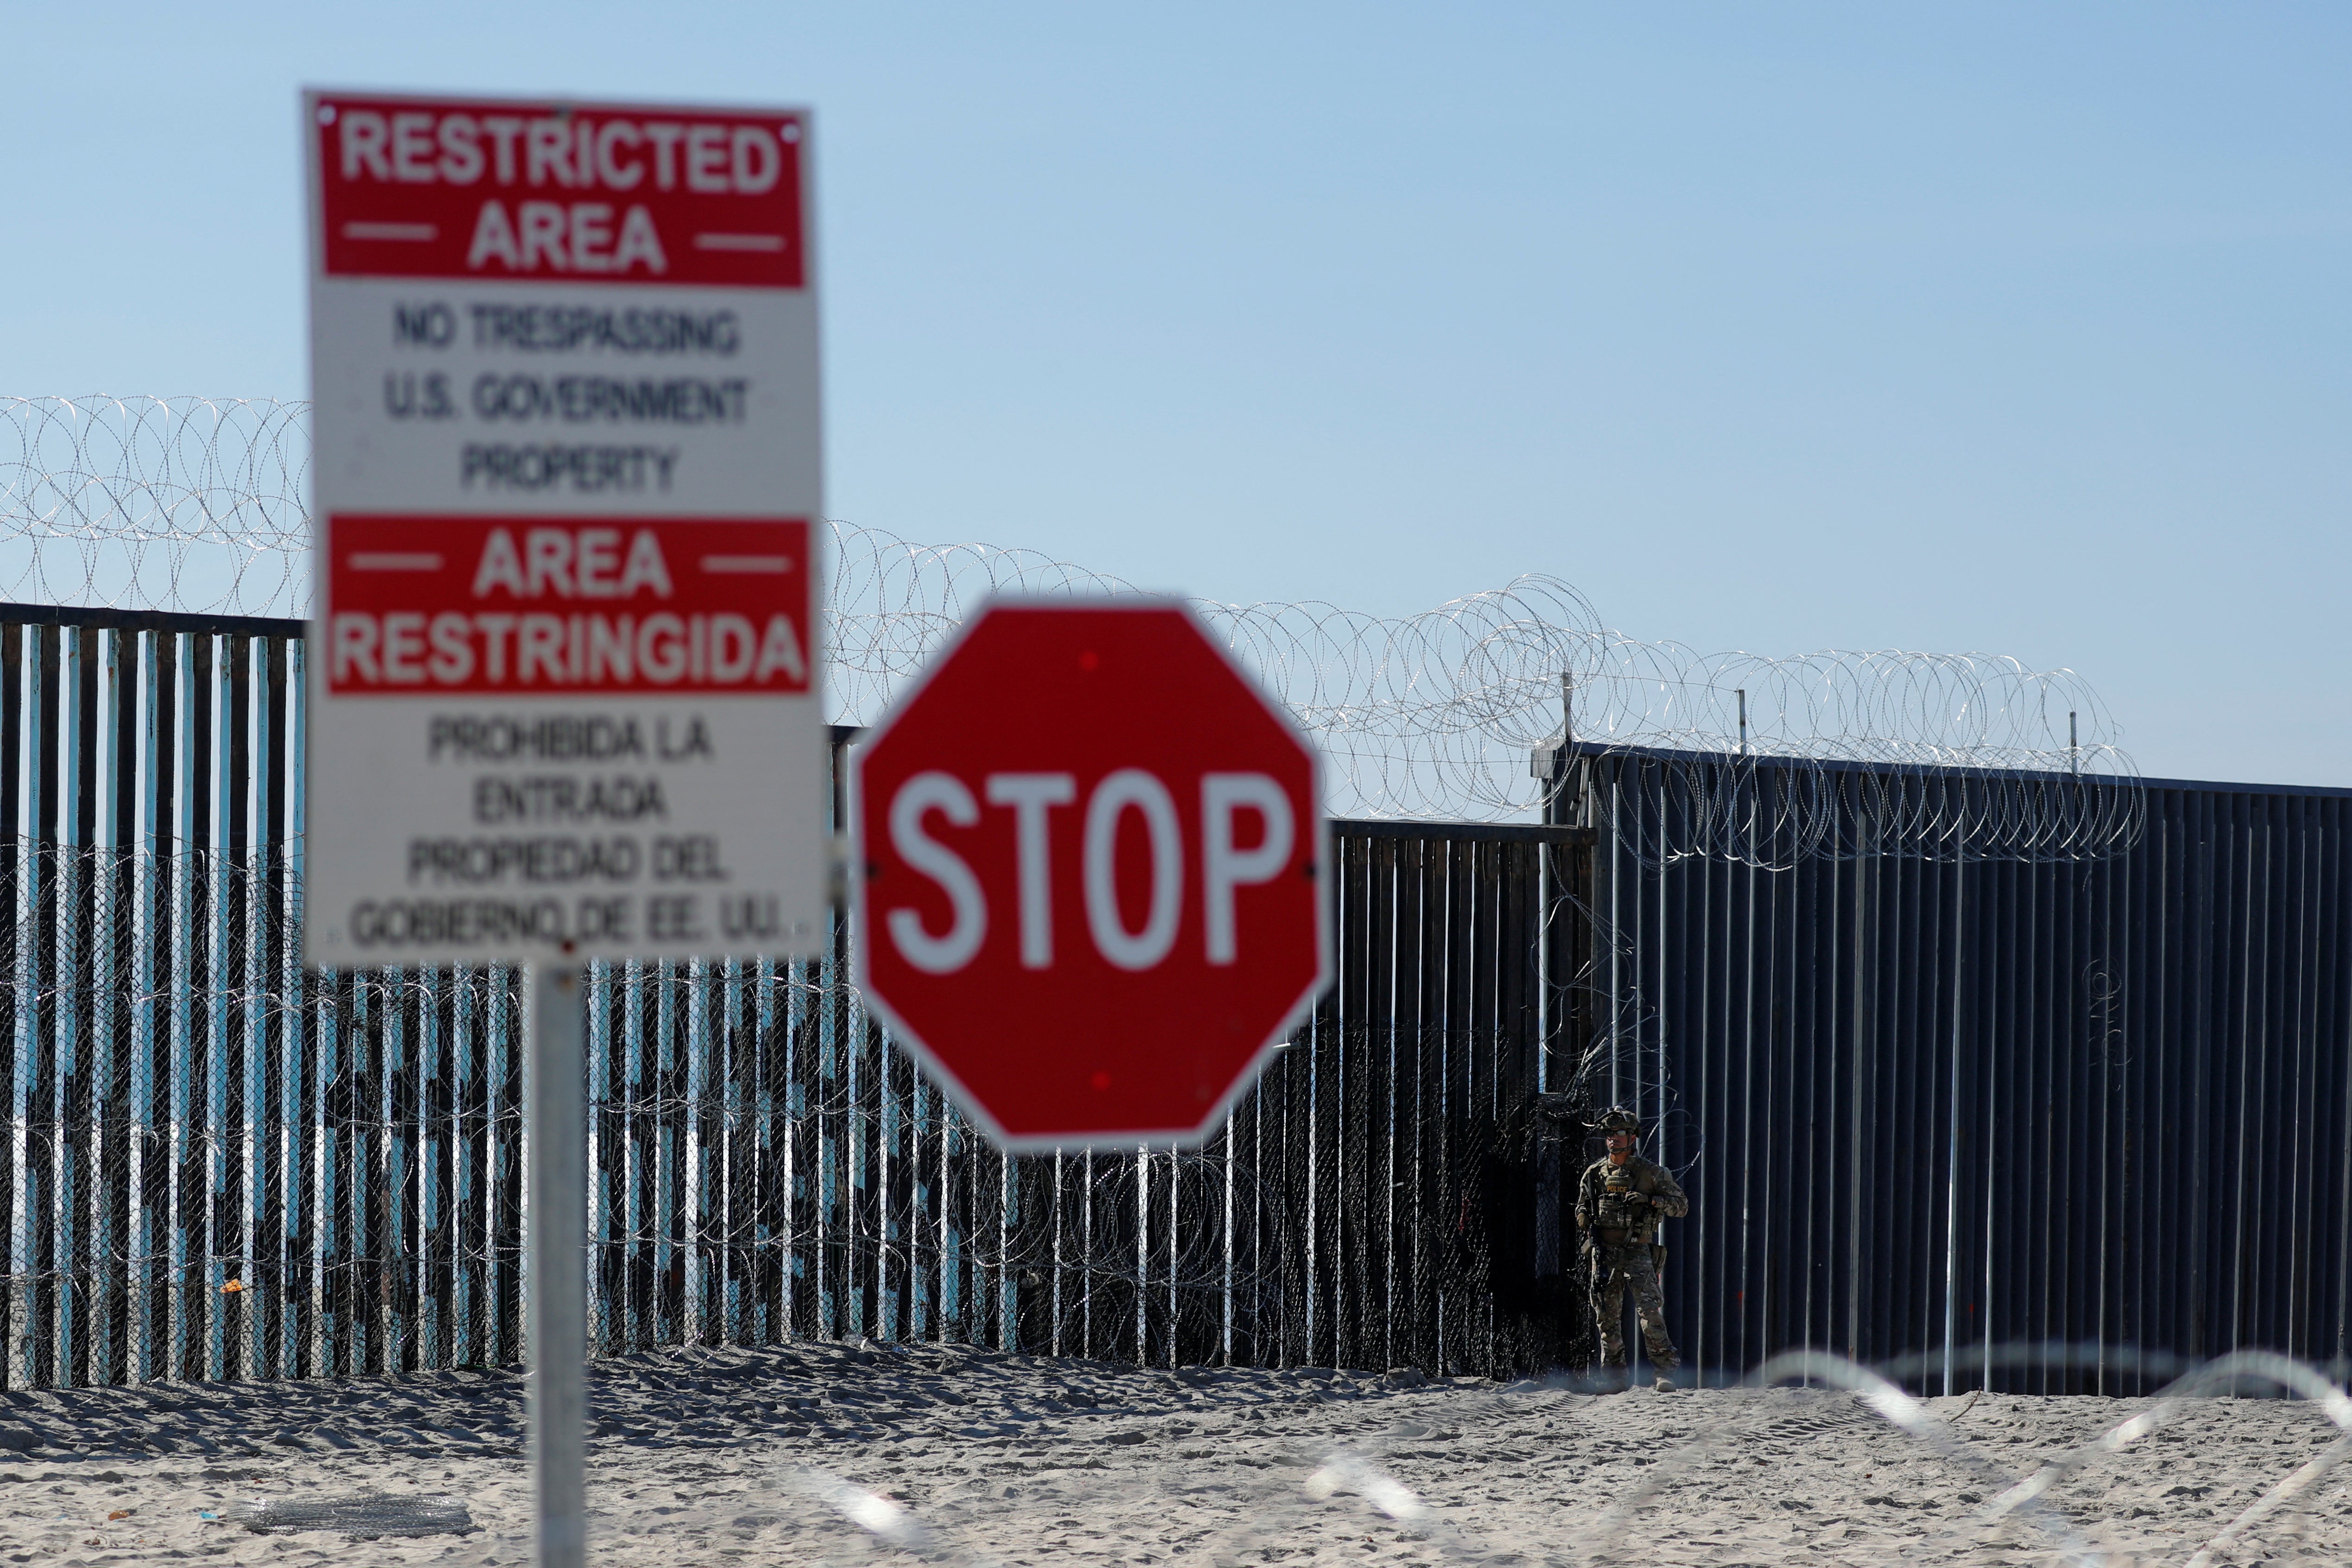 An armed U.S. Customs and Border Patrol agent stands watch at the border fence